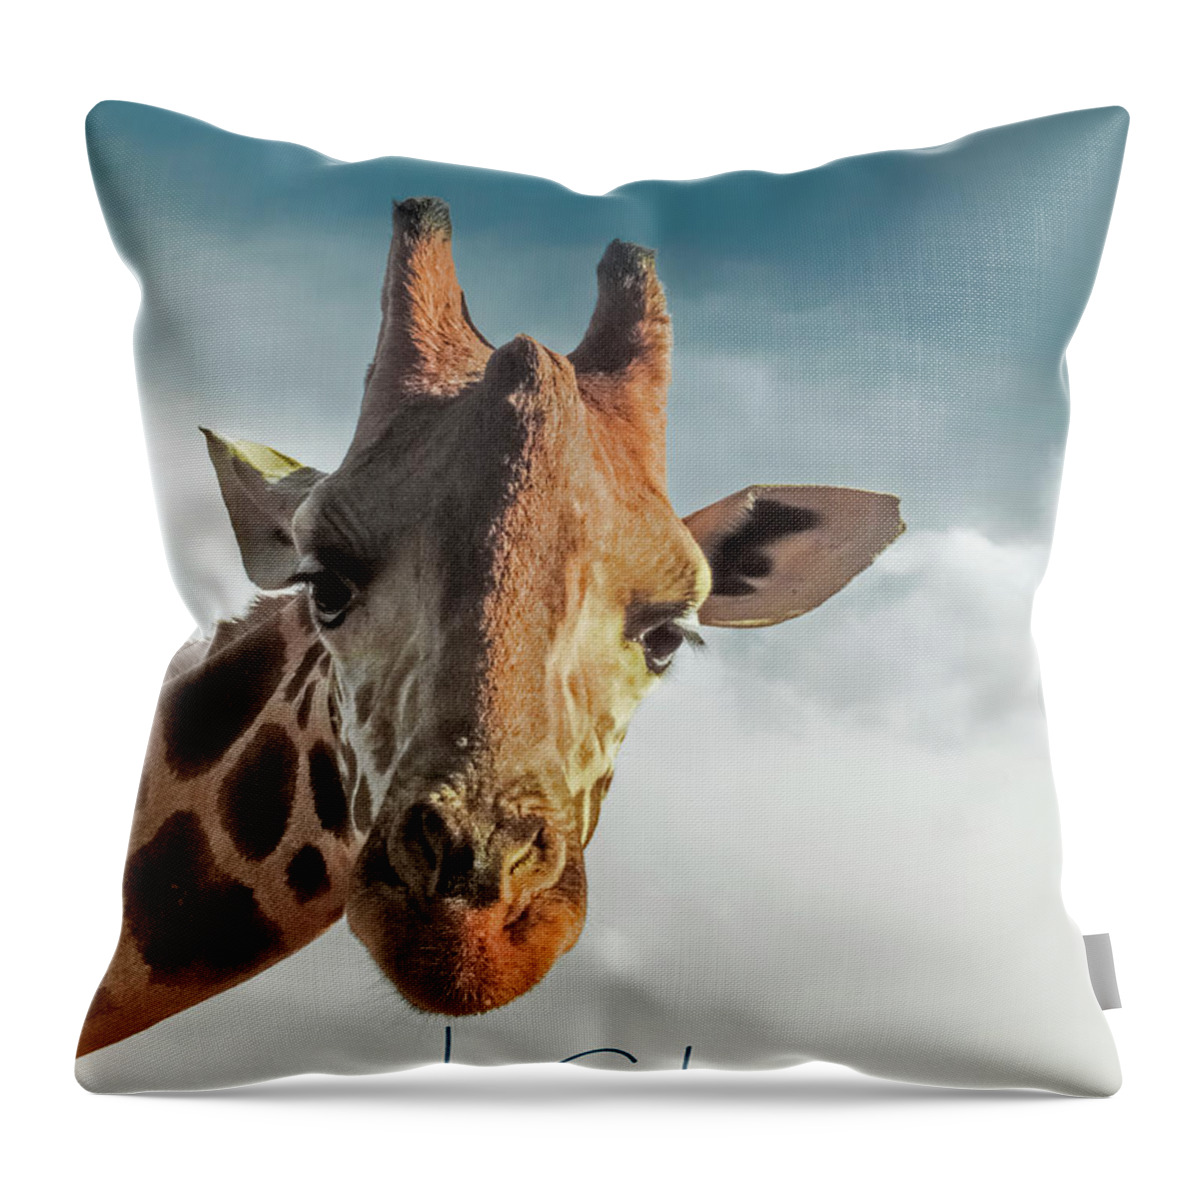 Giraffe Throw Pillow featuring the photograph Hello Down There by Karen Lewis